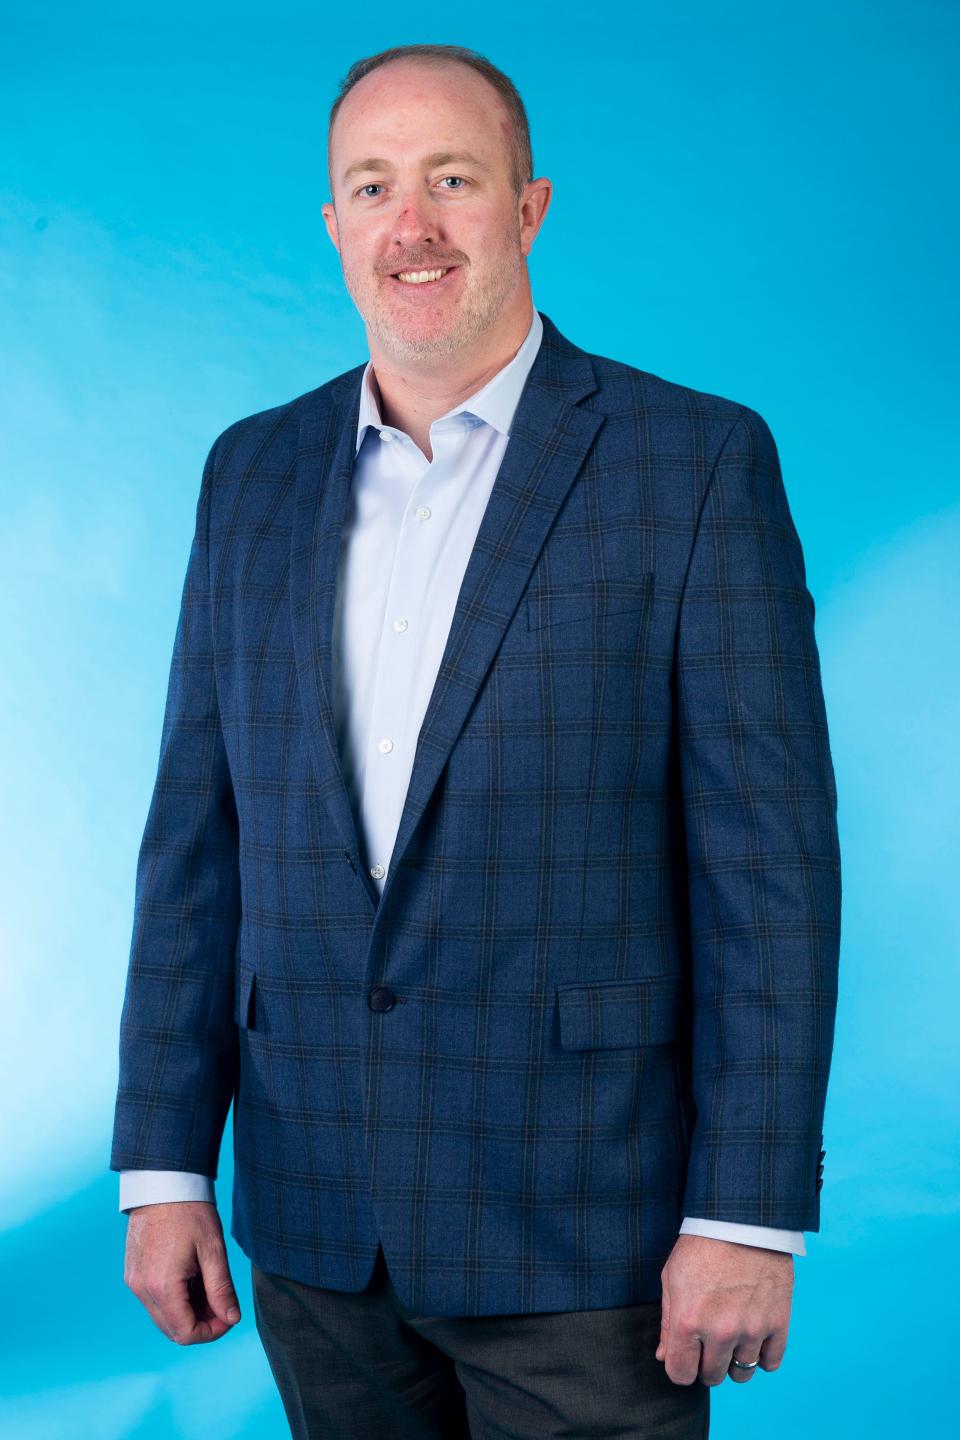 James Hatfield, Redevelopment and Real Estate Director, Knoxville's Community Development Corporation, 40 under 40 Class of 2021. Pictured in Knoxville, Tenn. on Wednesday, Nov. 3, 2021.